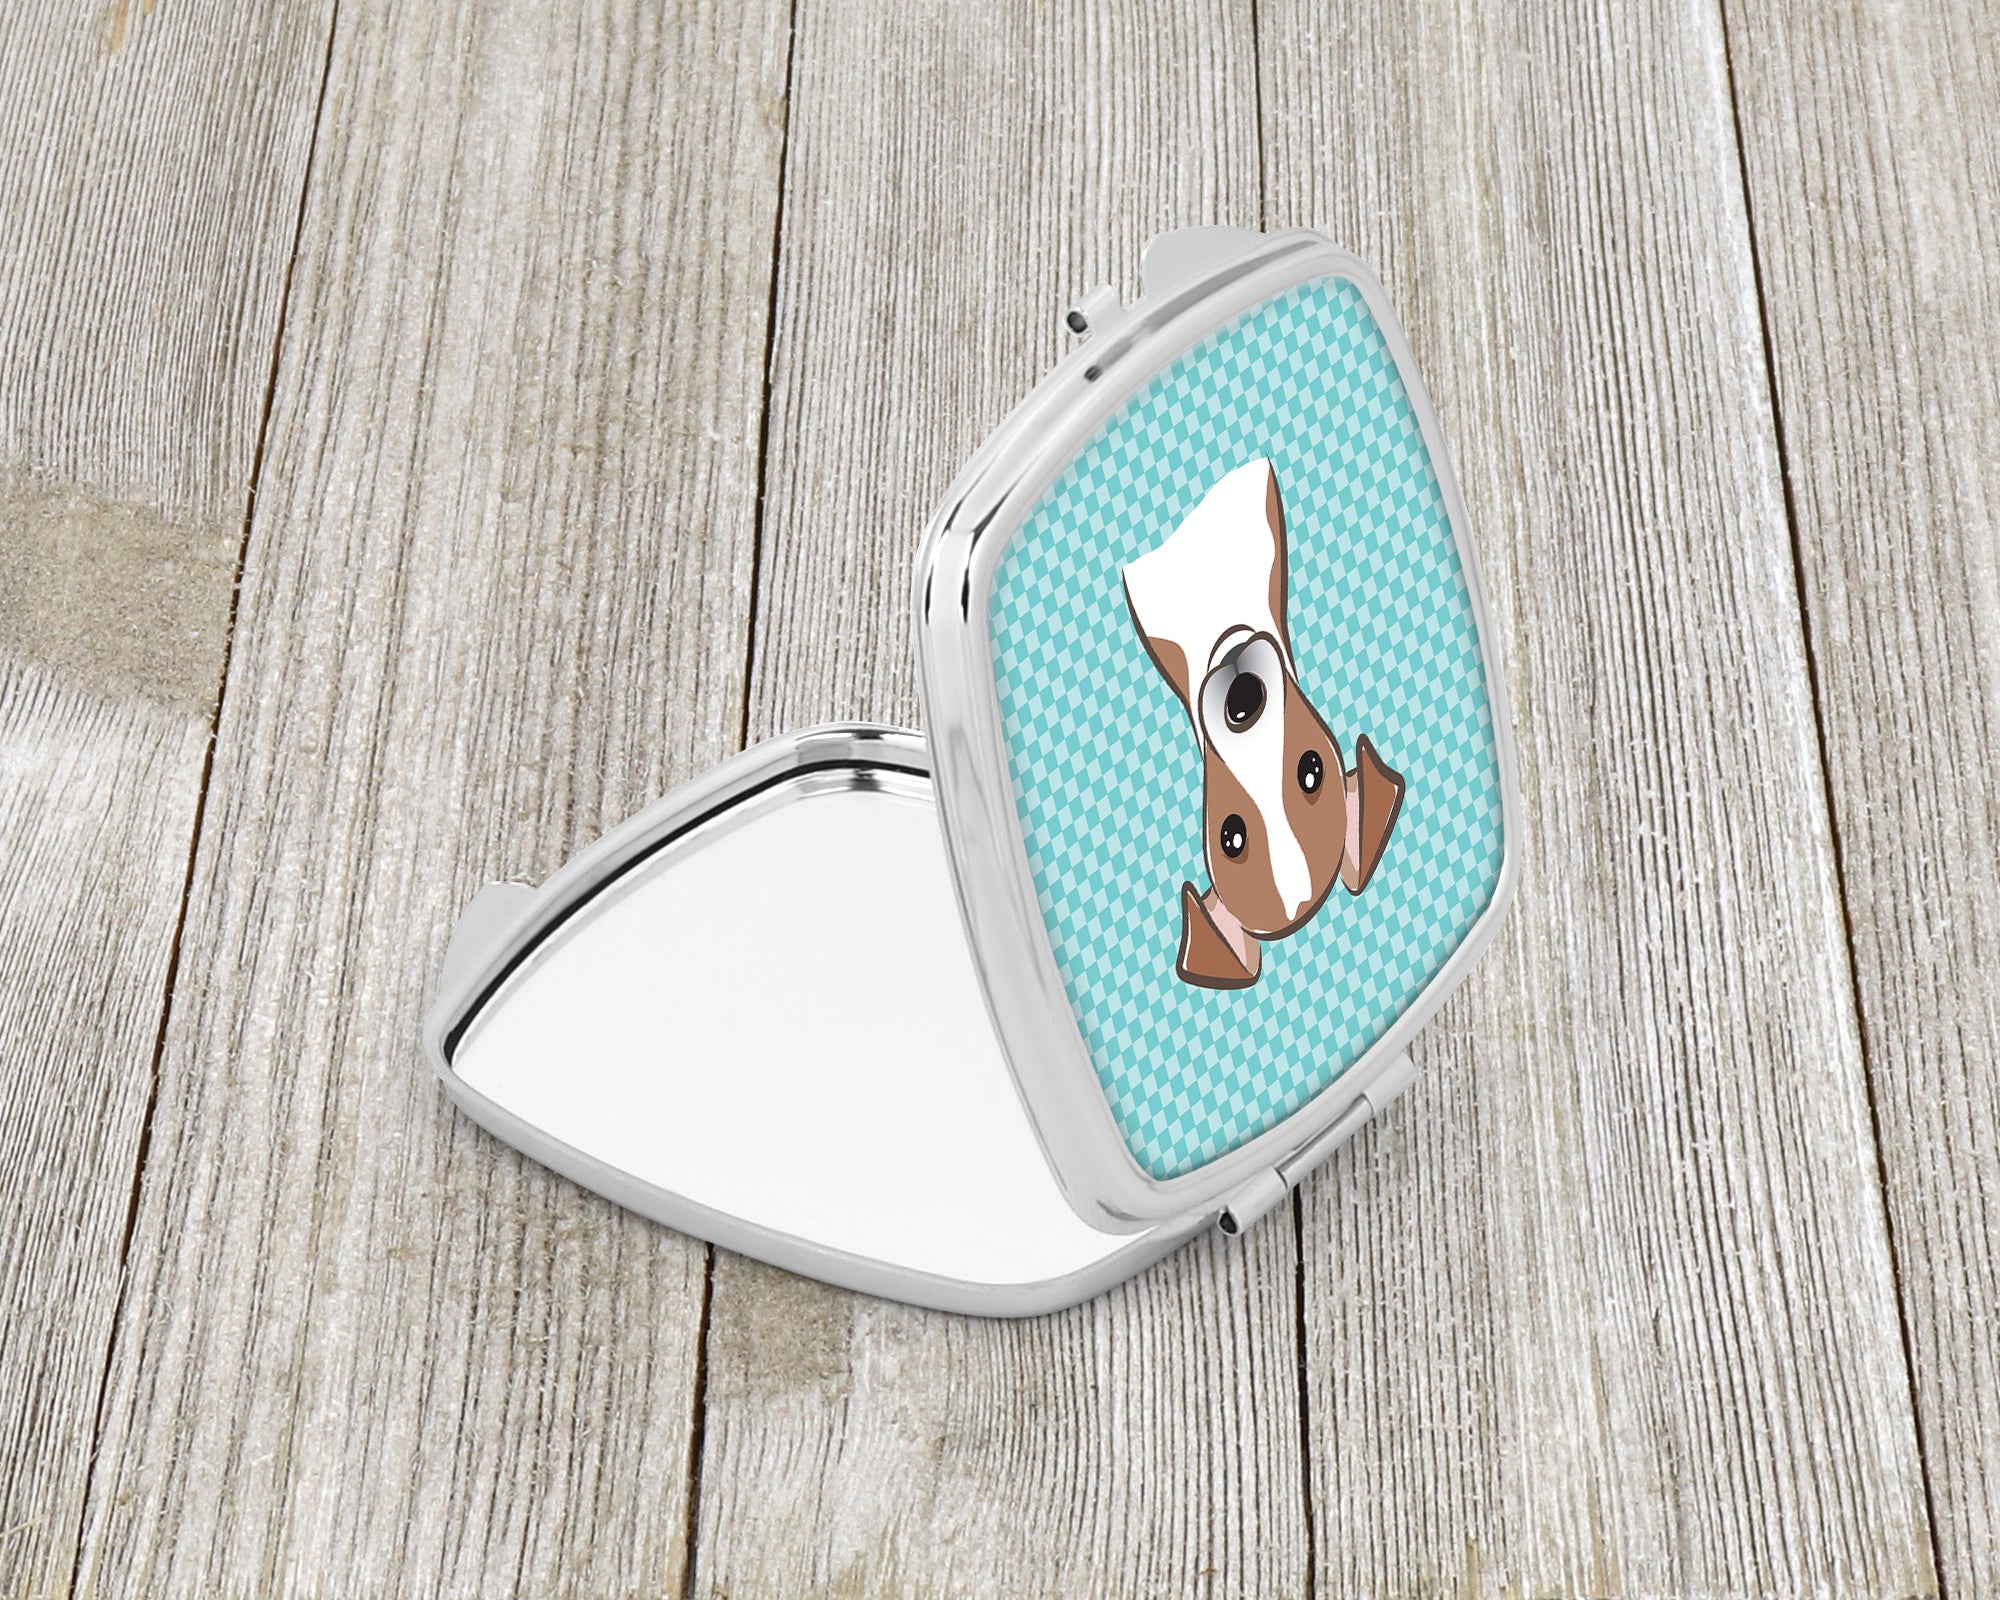 Checkerboard Blue Jack Russell Terrier Compact Mirror BB1198SCM